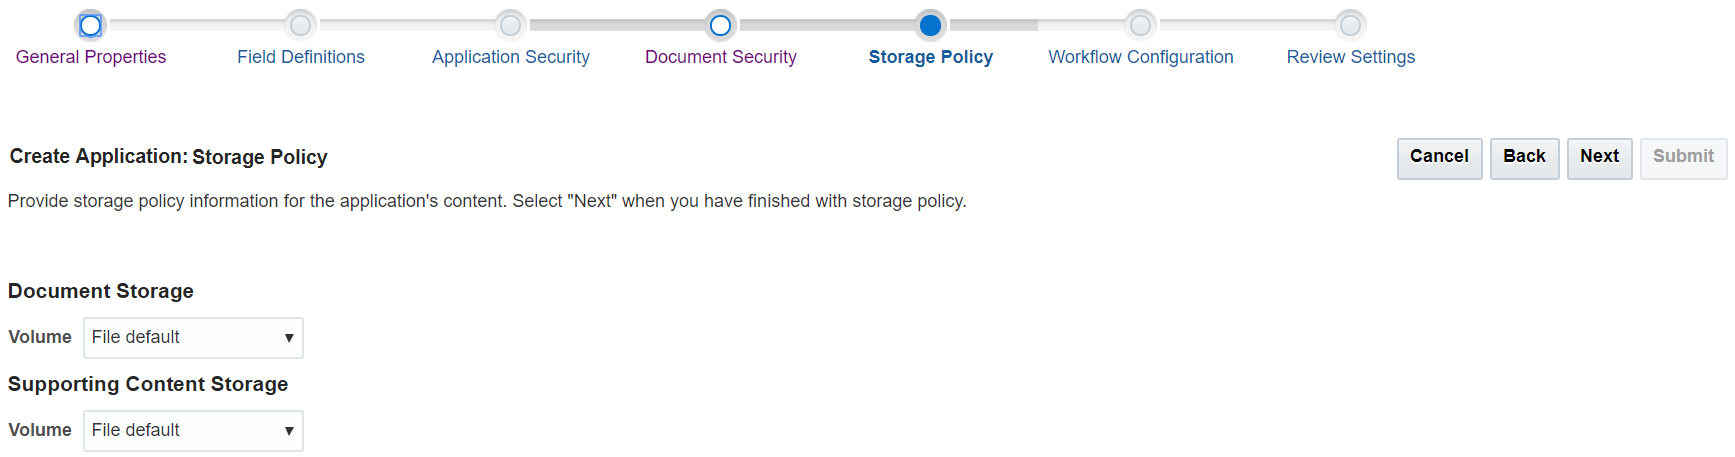 Creating Application: Storage Policy